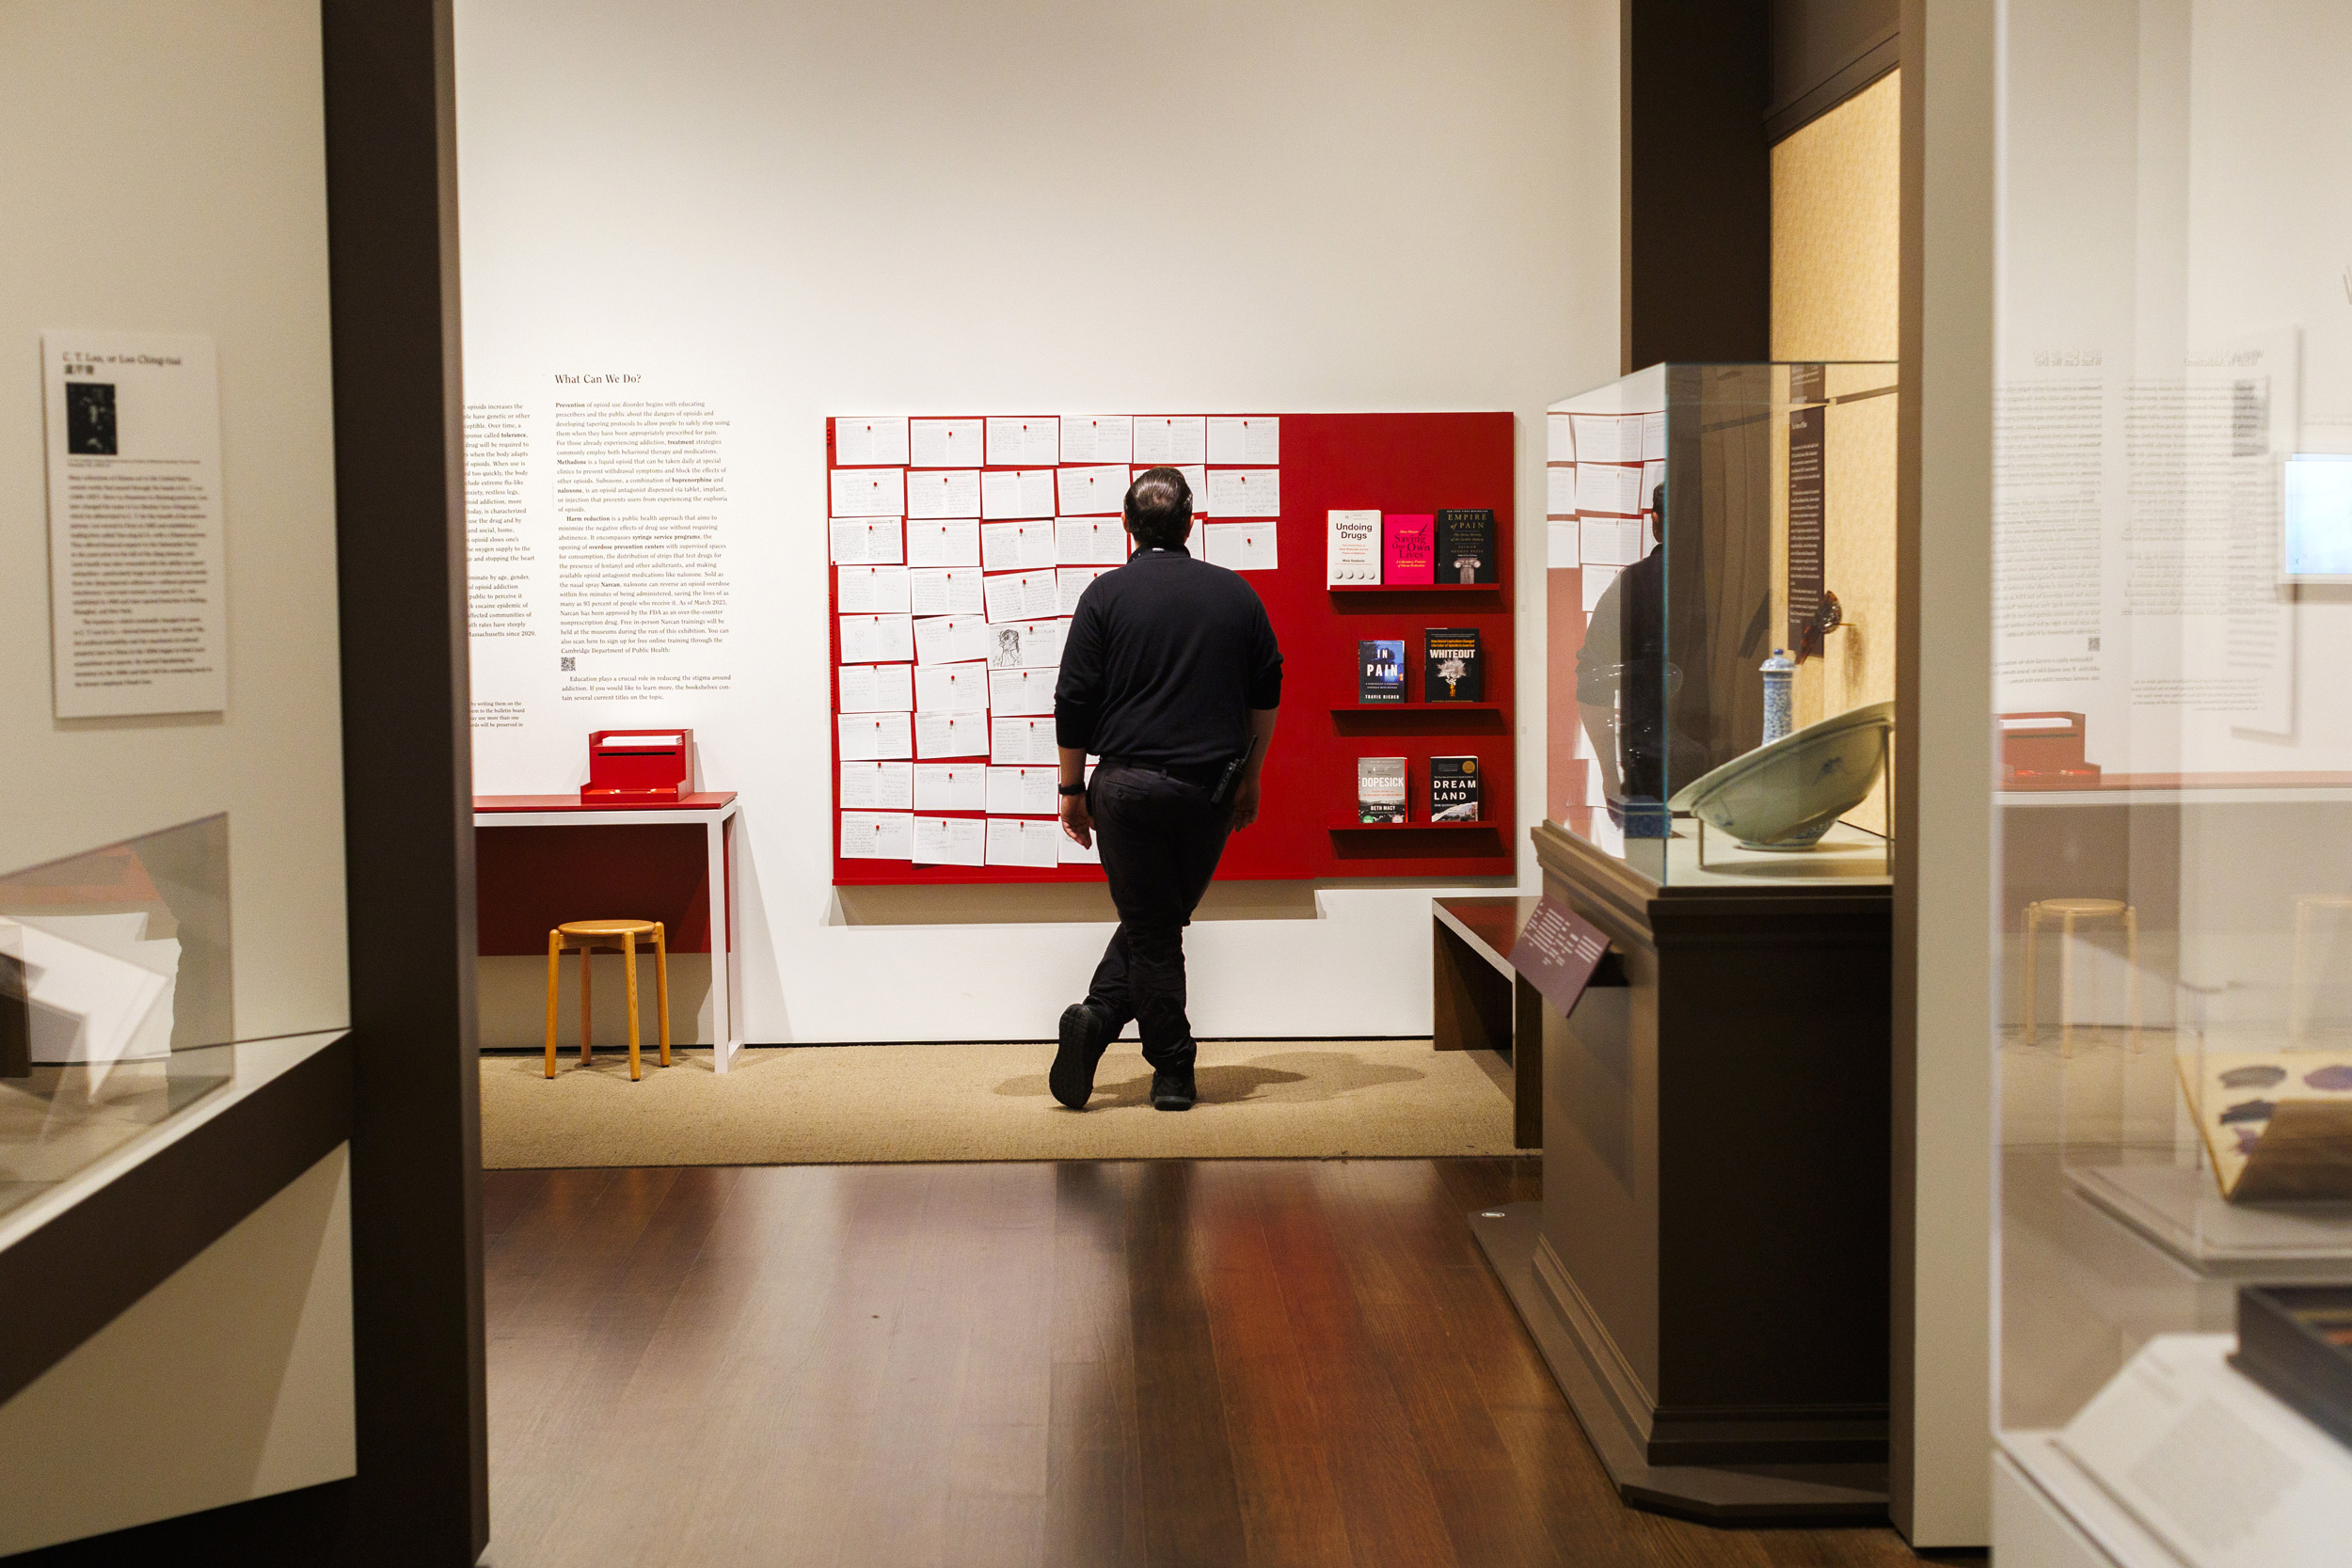 A person is pictured reading the comments written in the exhibition at Harvard Art Museums.